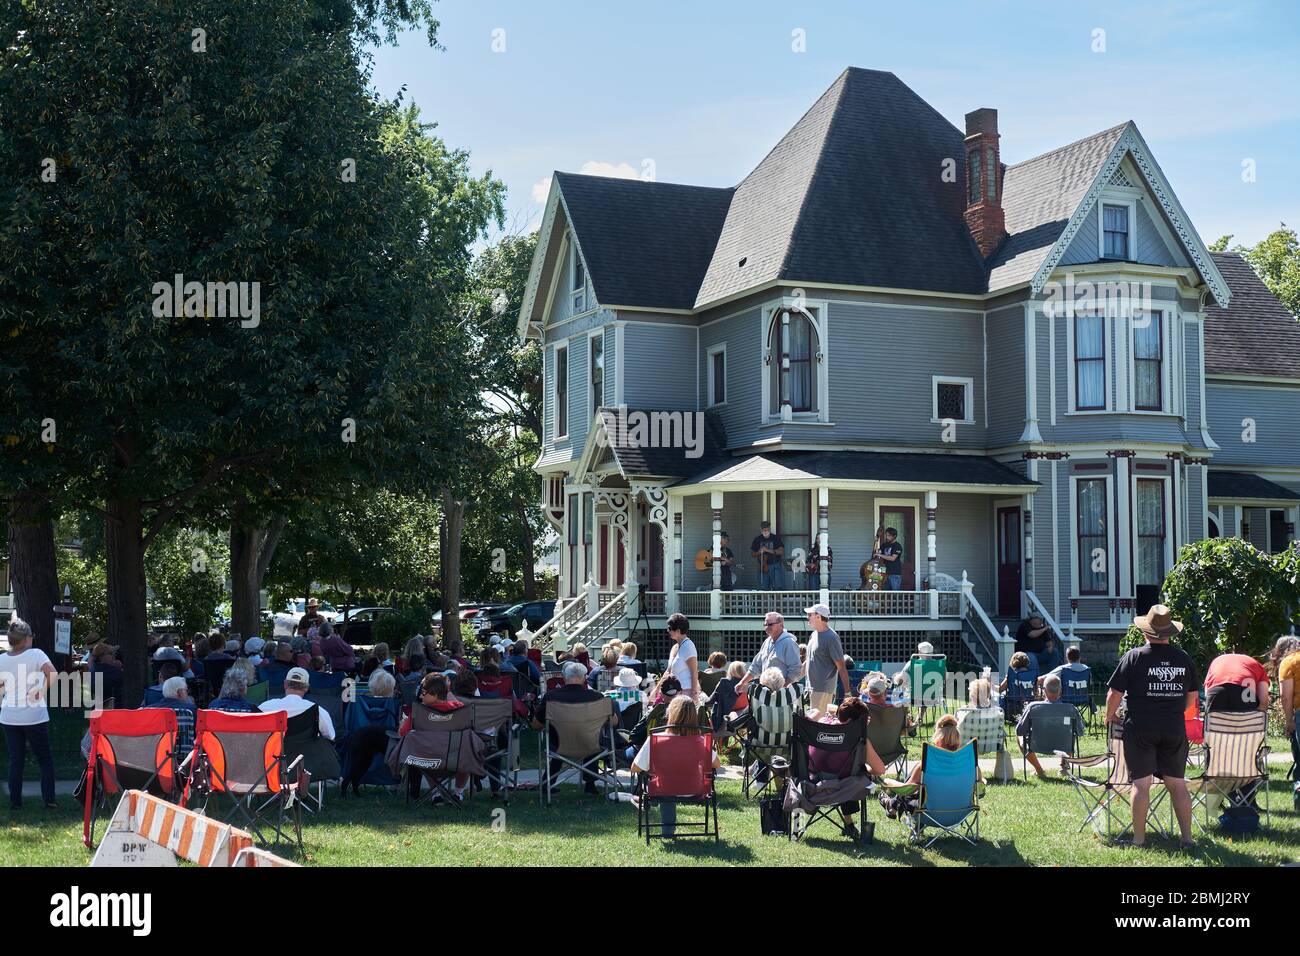 Crowd watched musicians perform from a porch in a neighborhood residential historic district on a sunny day. Stock Photo